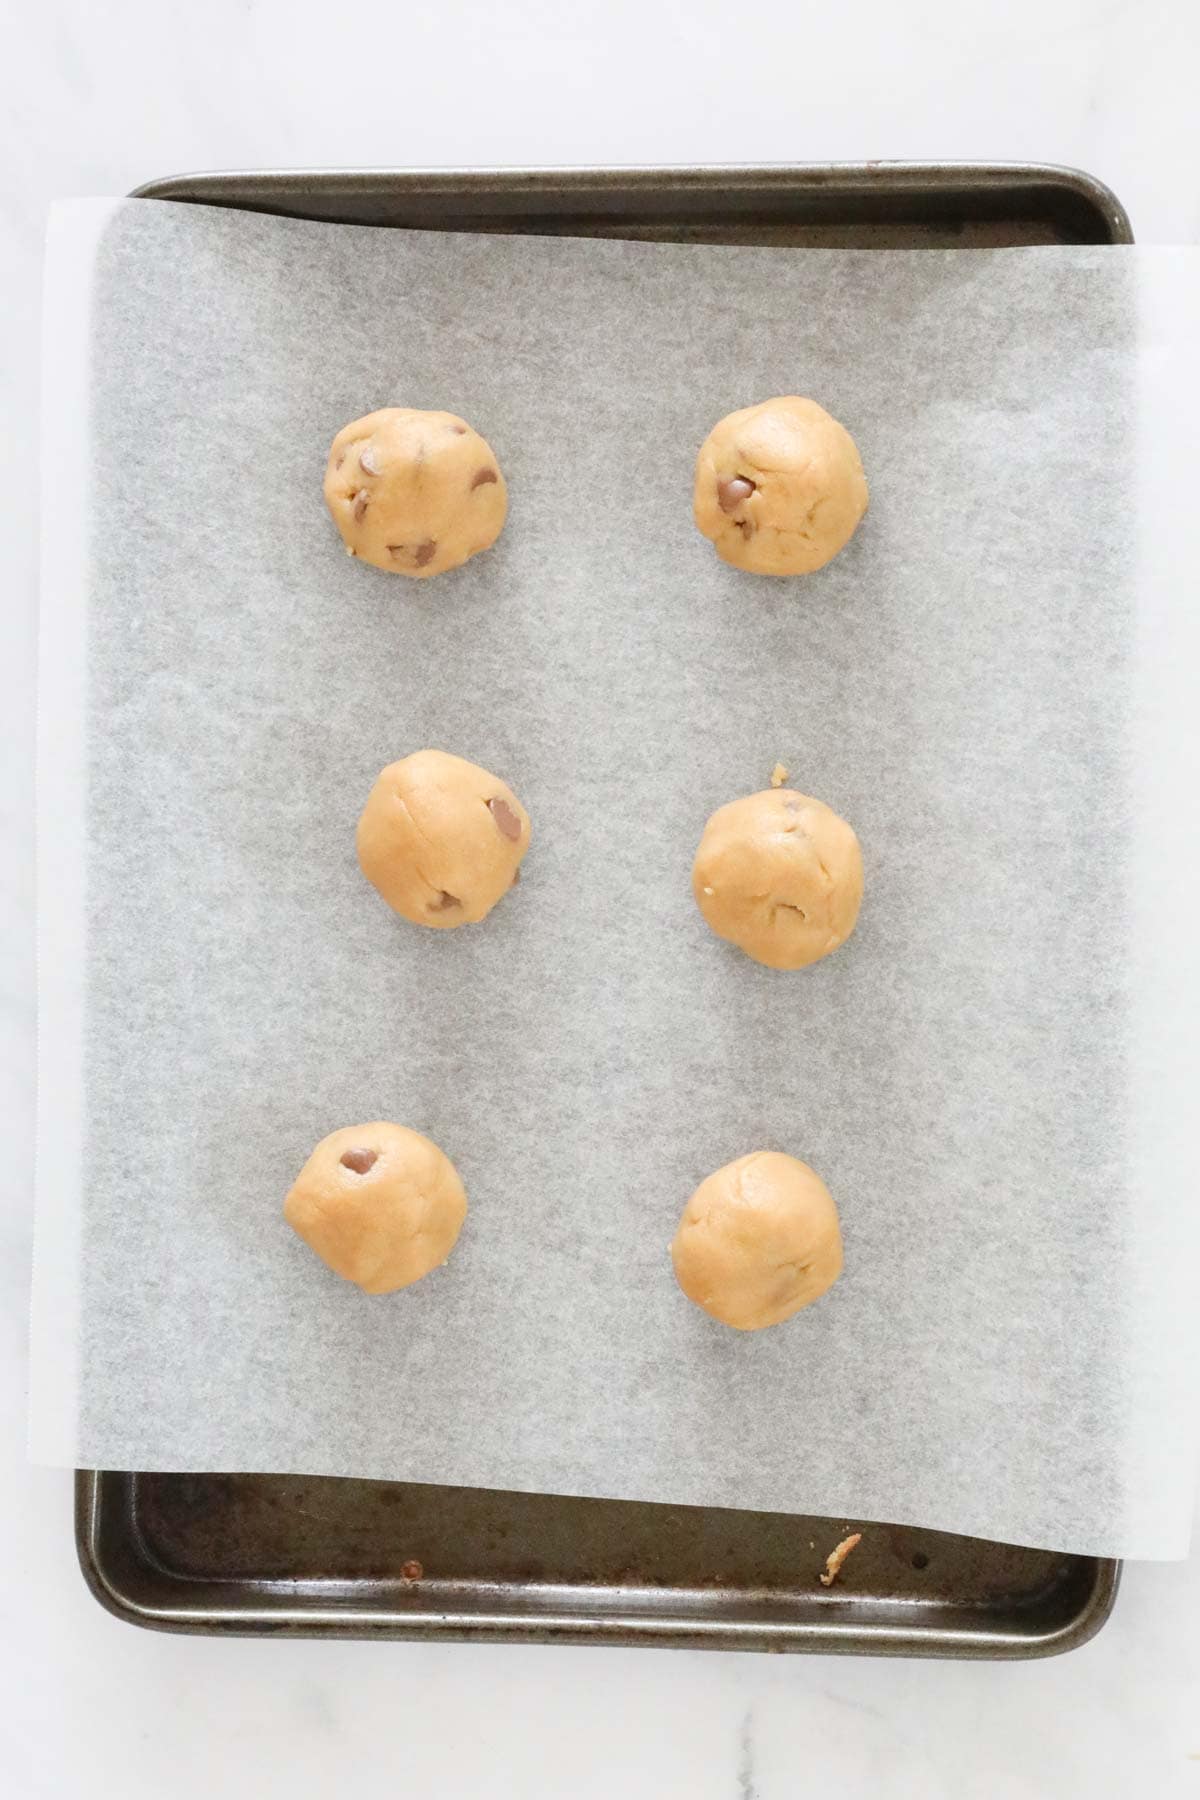 Balls of cookie dough placed on baking tray lined with baking paper.